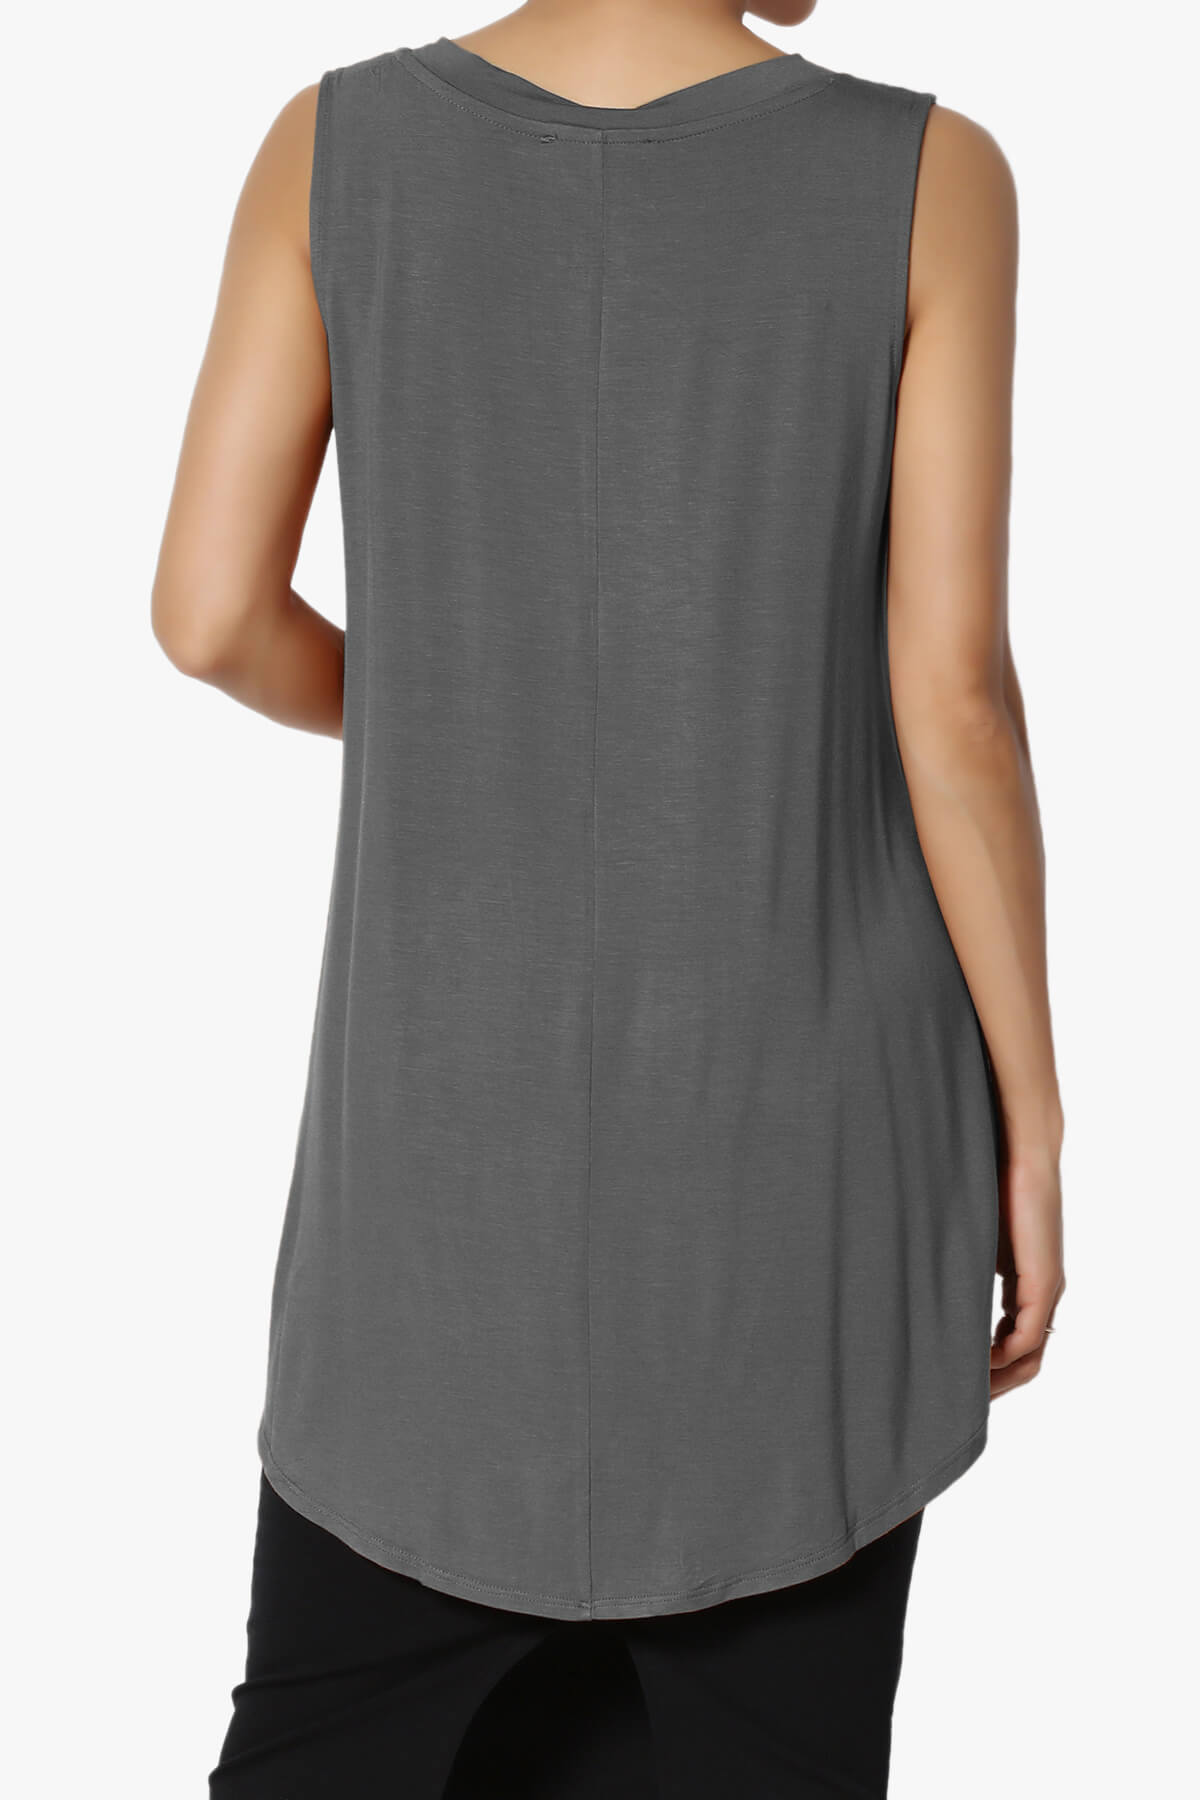 Load image into Gallery viewer, Myles Sleeveless V-Neck Luxe Jersey Top ASH GREY_2
